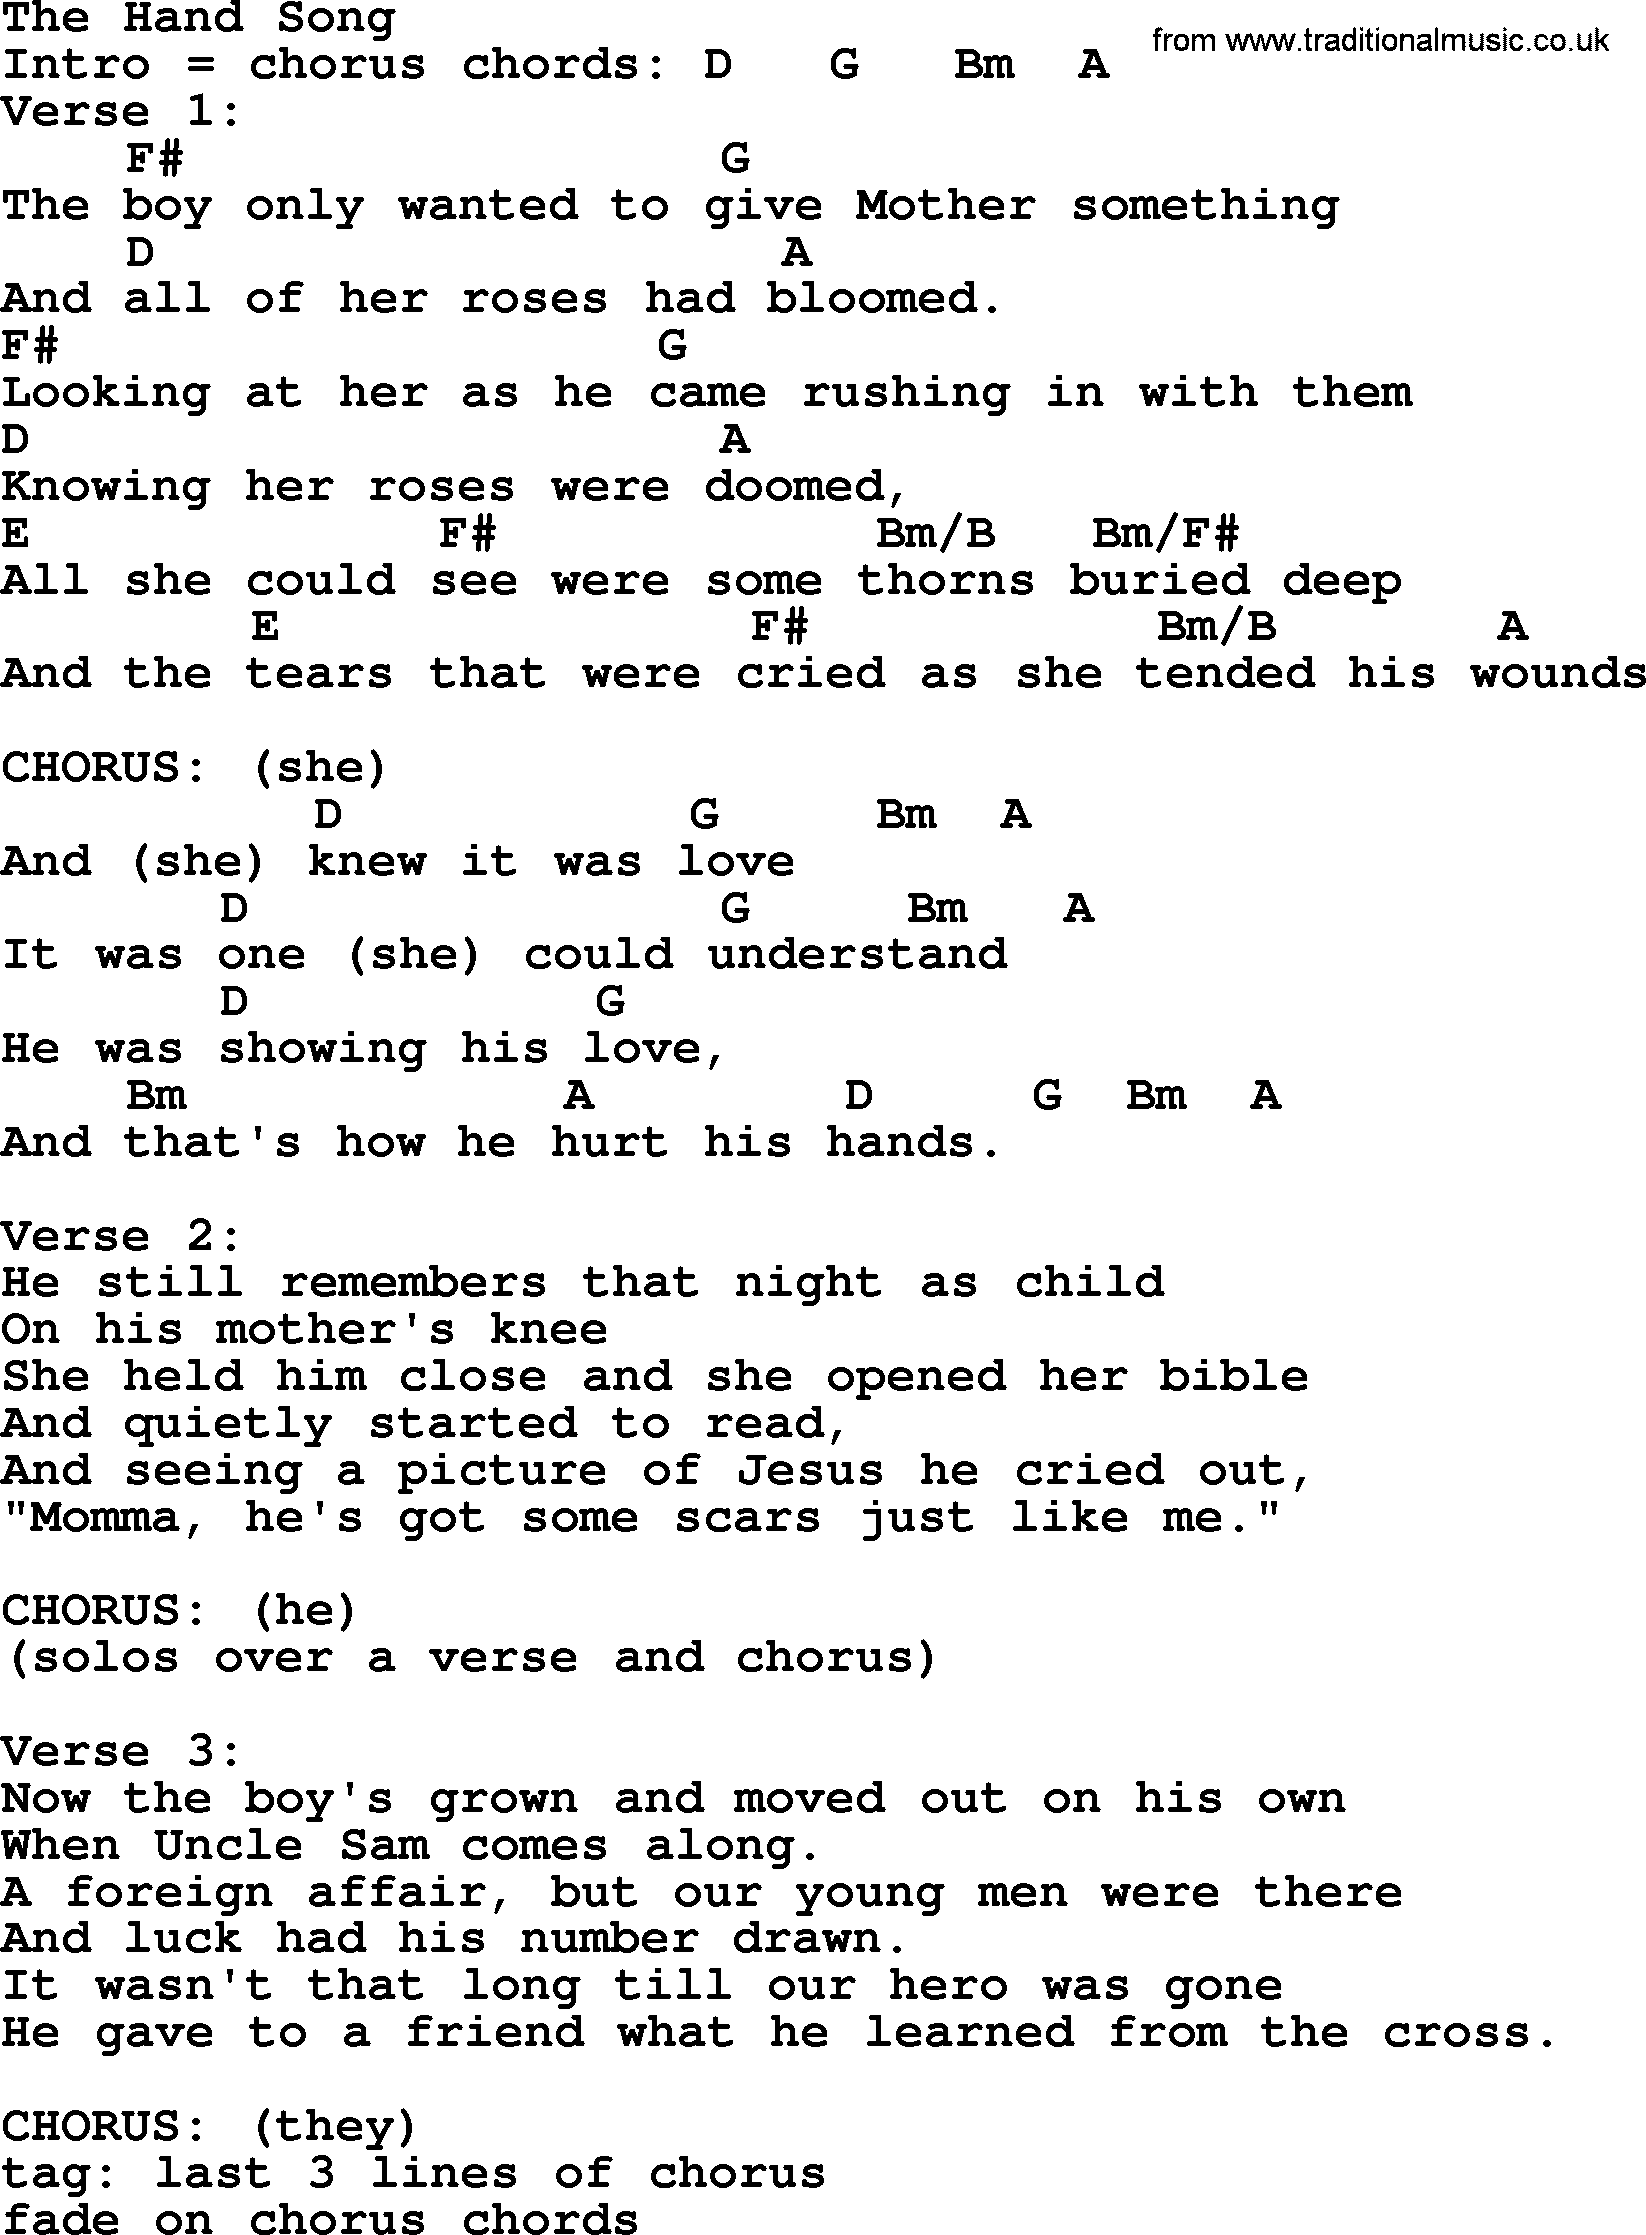 Bluegrass song: The Hand Song, lyrics and chords